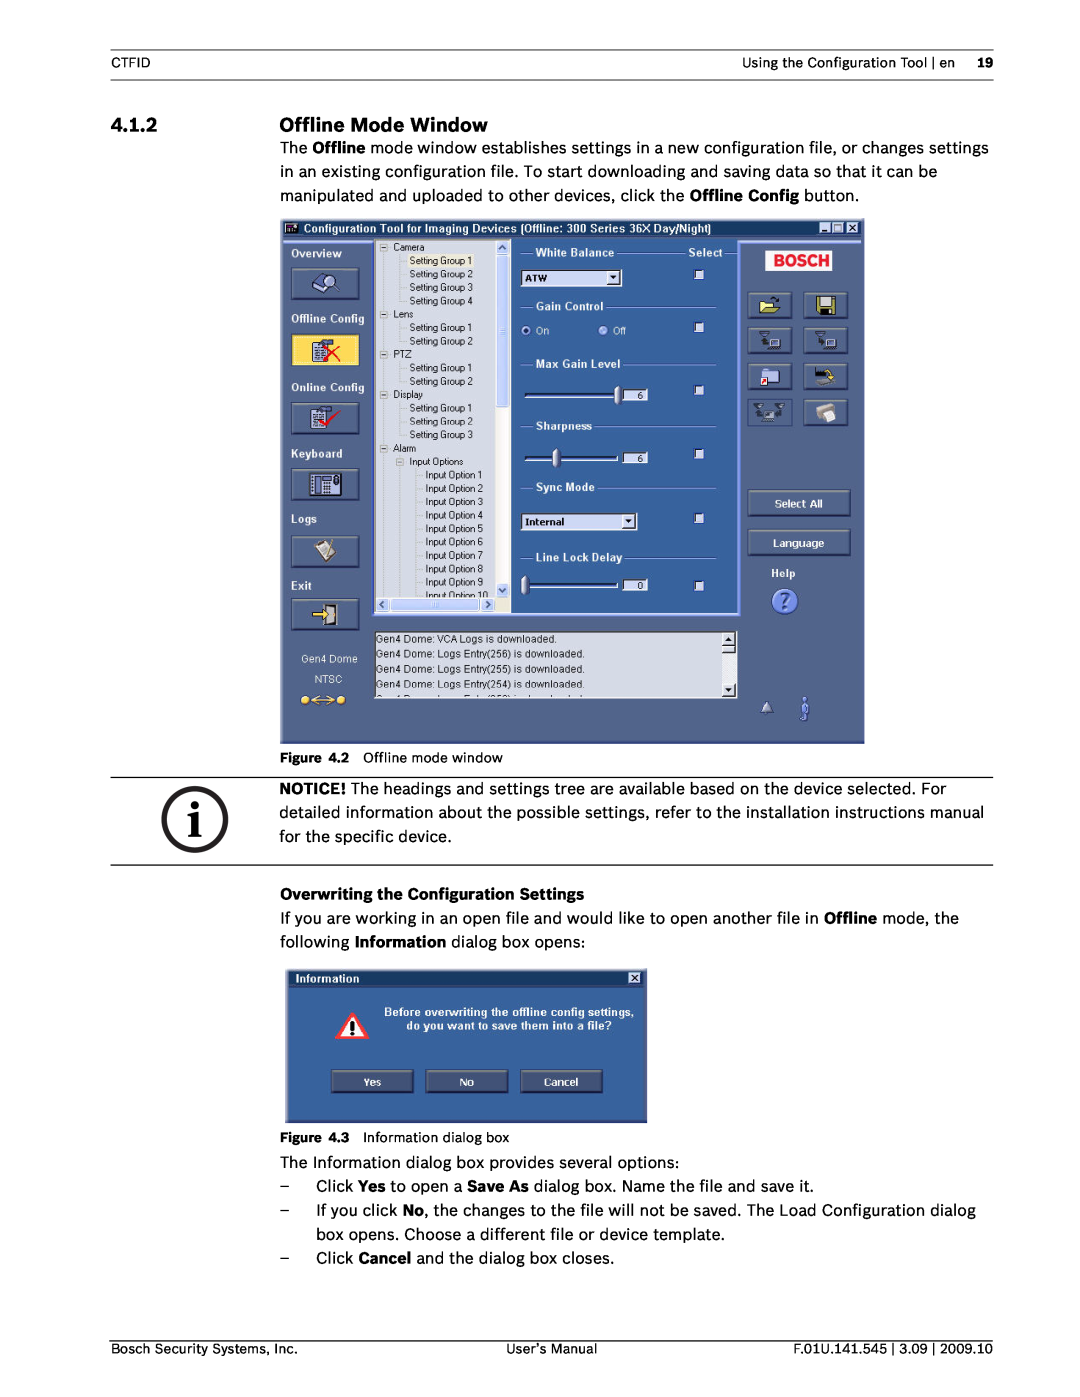 Bosch Appliances VP-CFGSFT user manual 4.1.2Offline Mode Window, Overwriting the Configuration Settings 